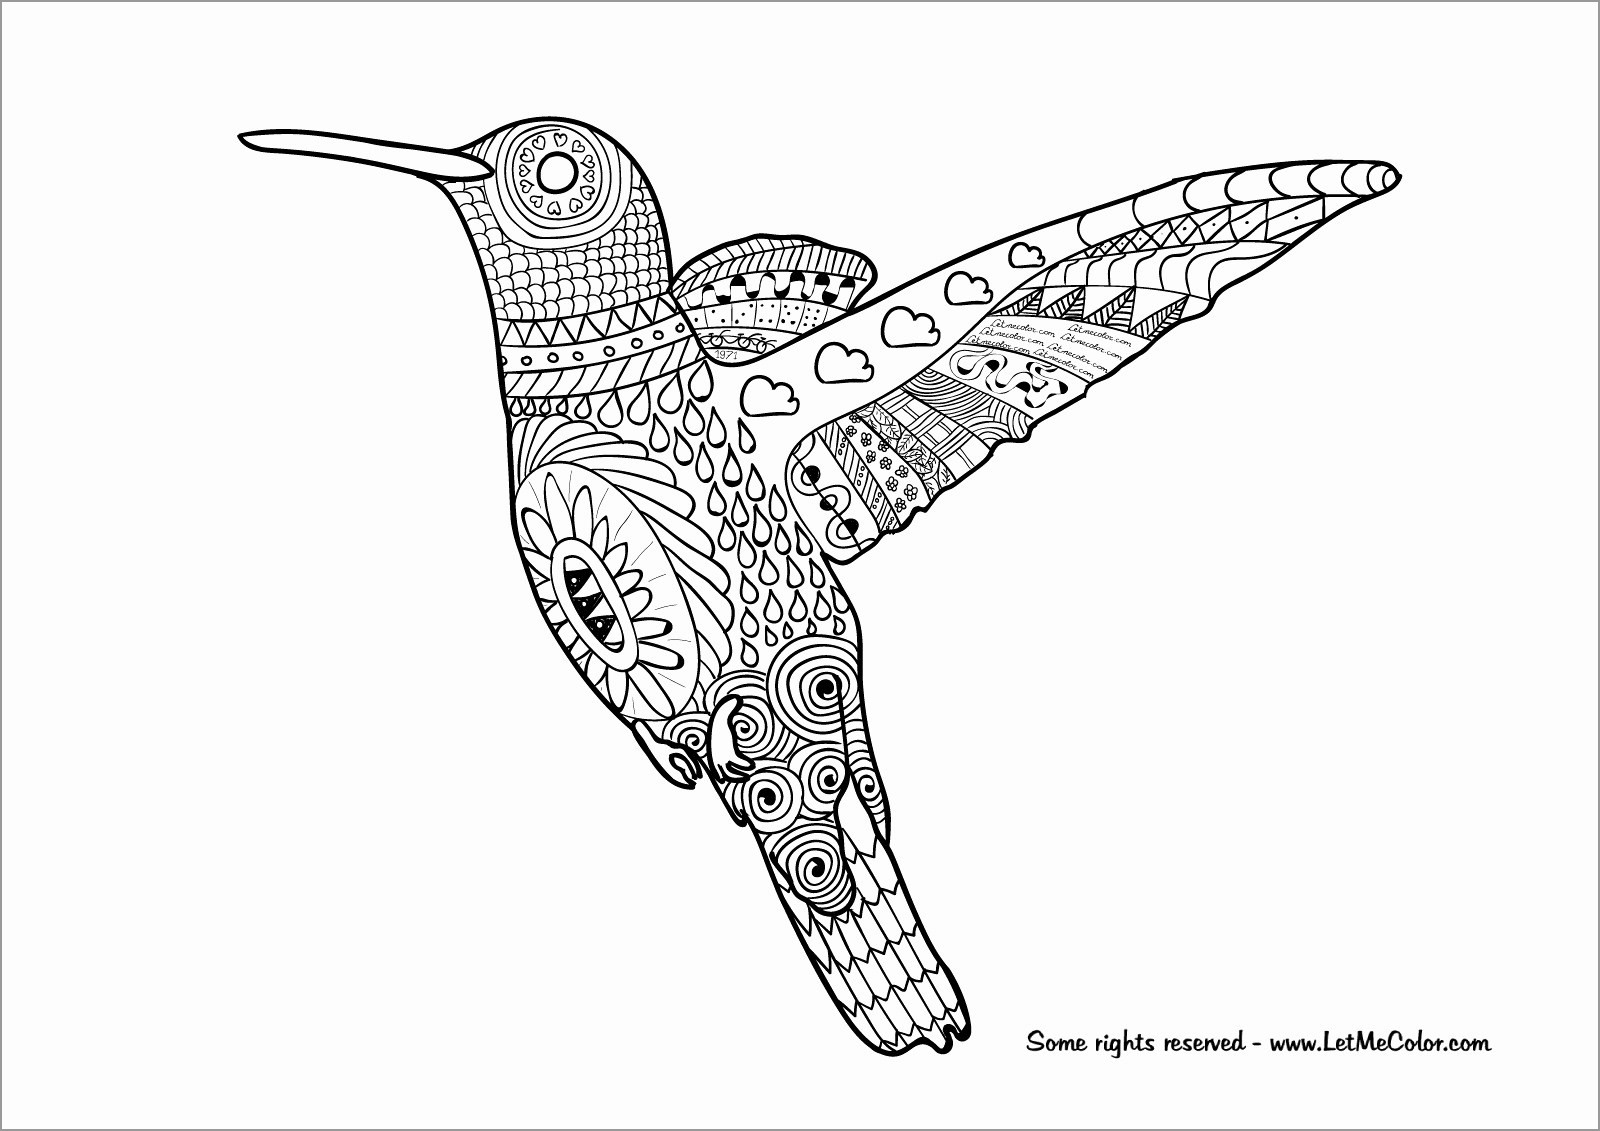 Mandala Crow Coloring Page for Adult